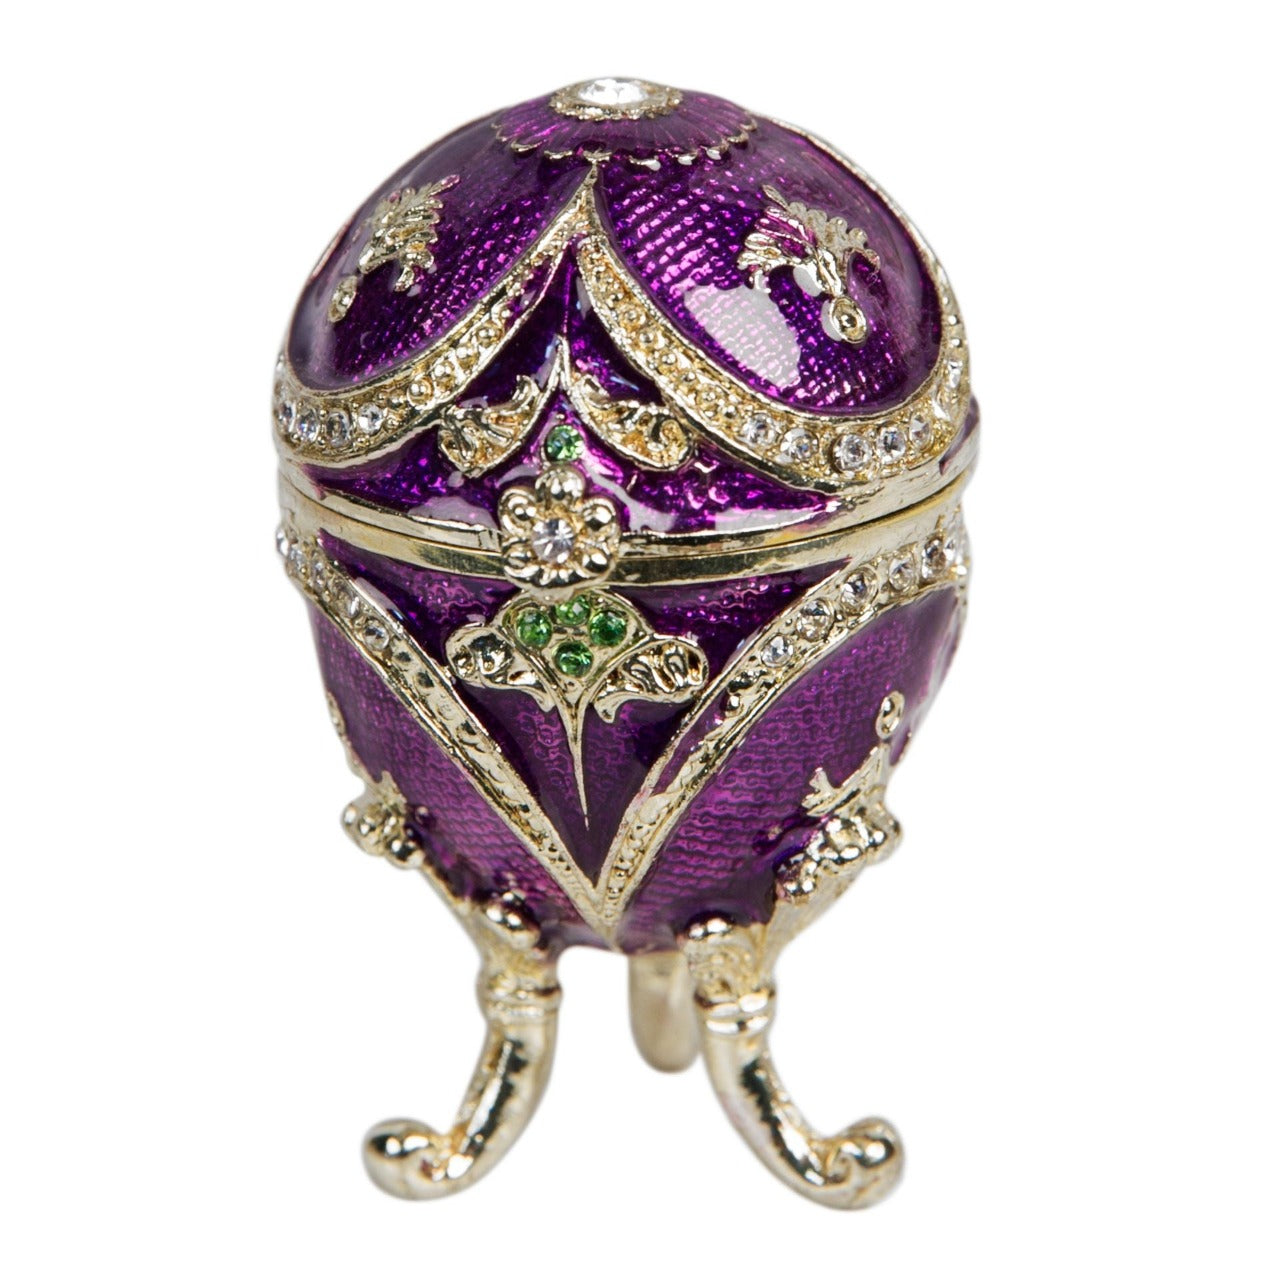 Treasured Trinkets - Small Fabergé Egg Purple  A beautiful, hand painted and crystal finished fabergé egg trinket box from Treasured Trinkets.